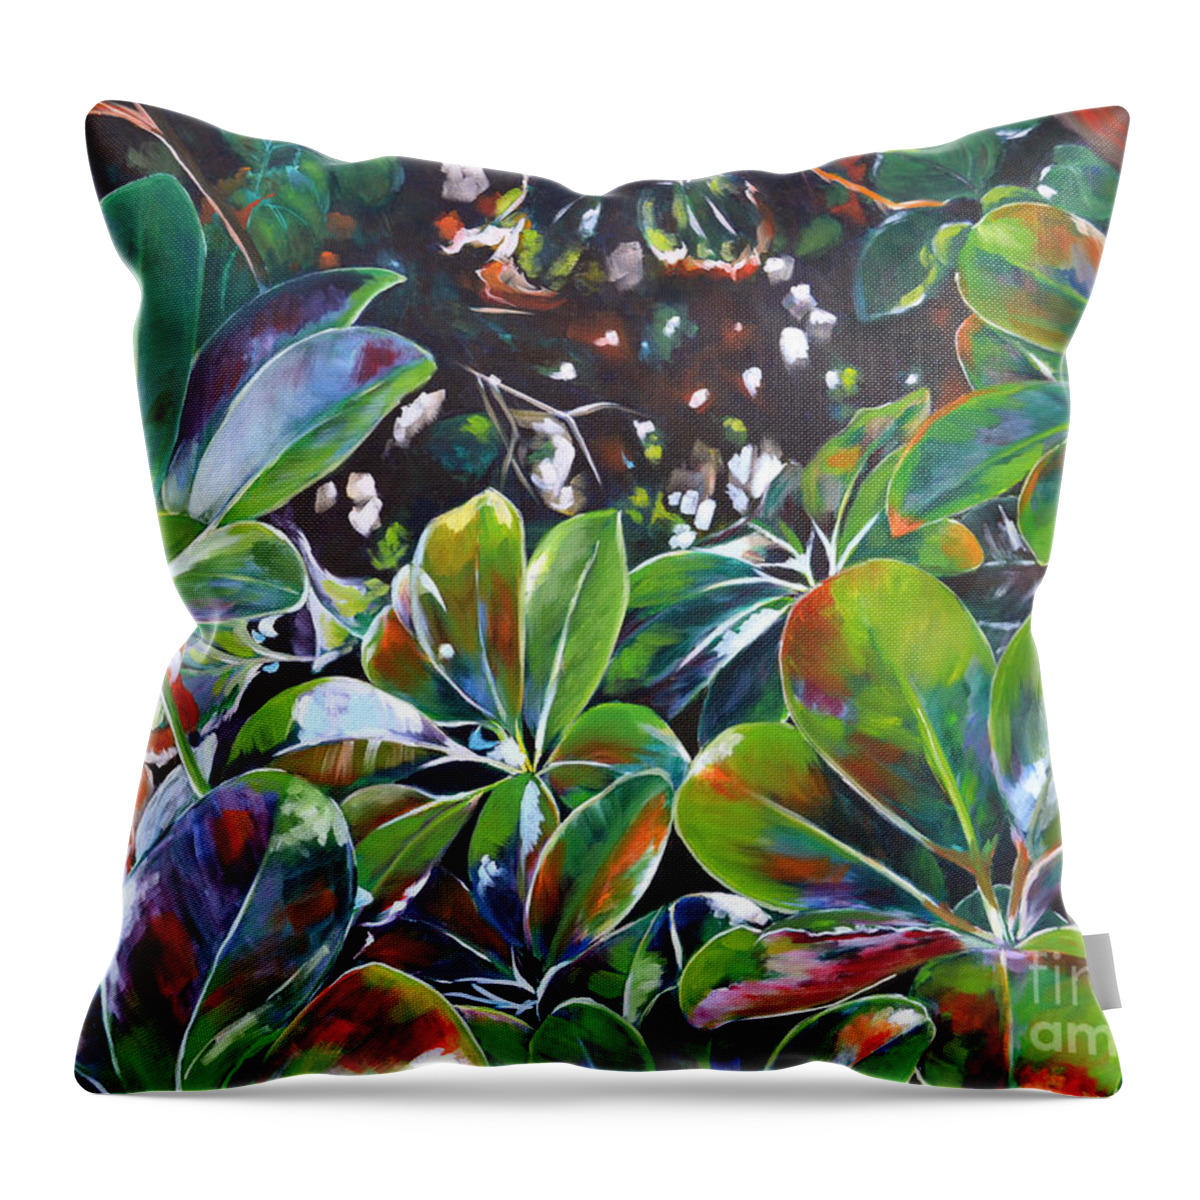 Money Tree Throw Pillow featuring the painting Harmony by Larry Geyrozaga